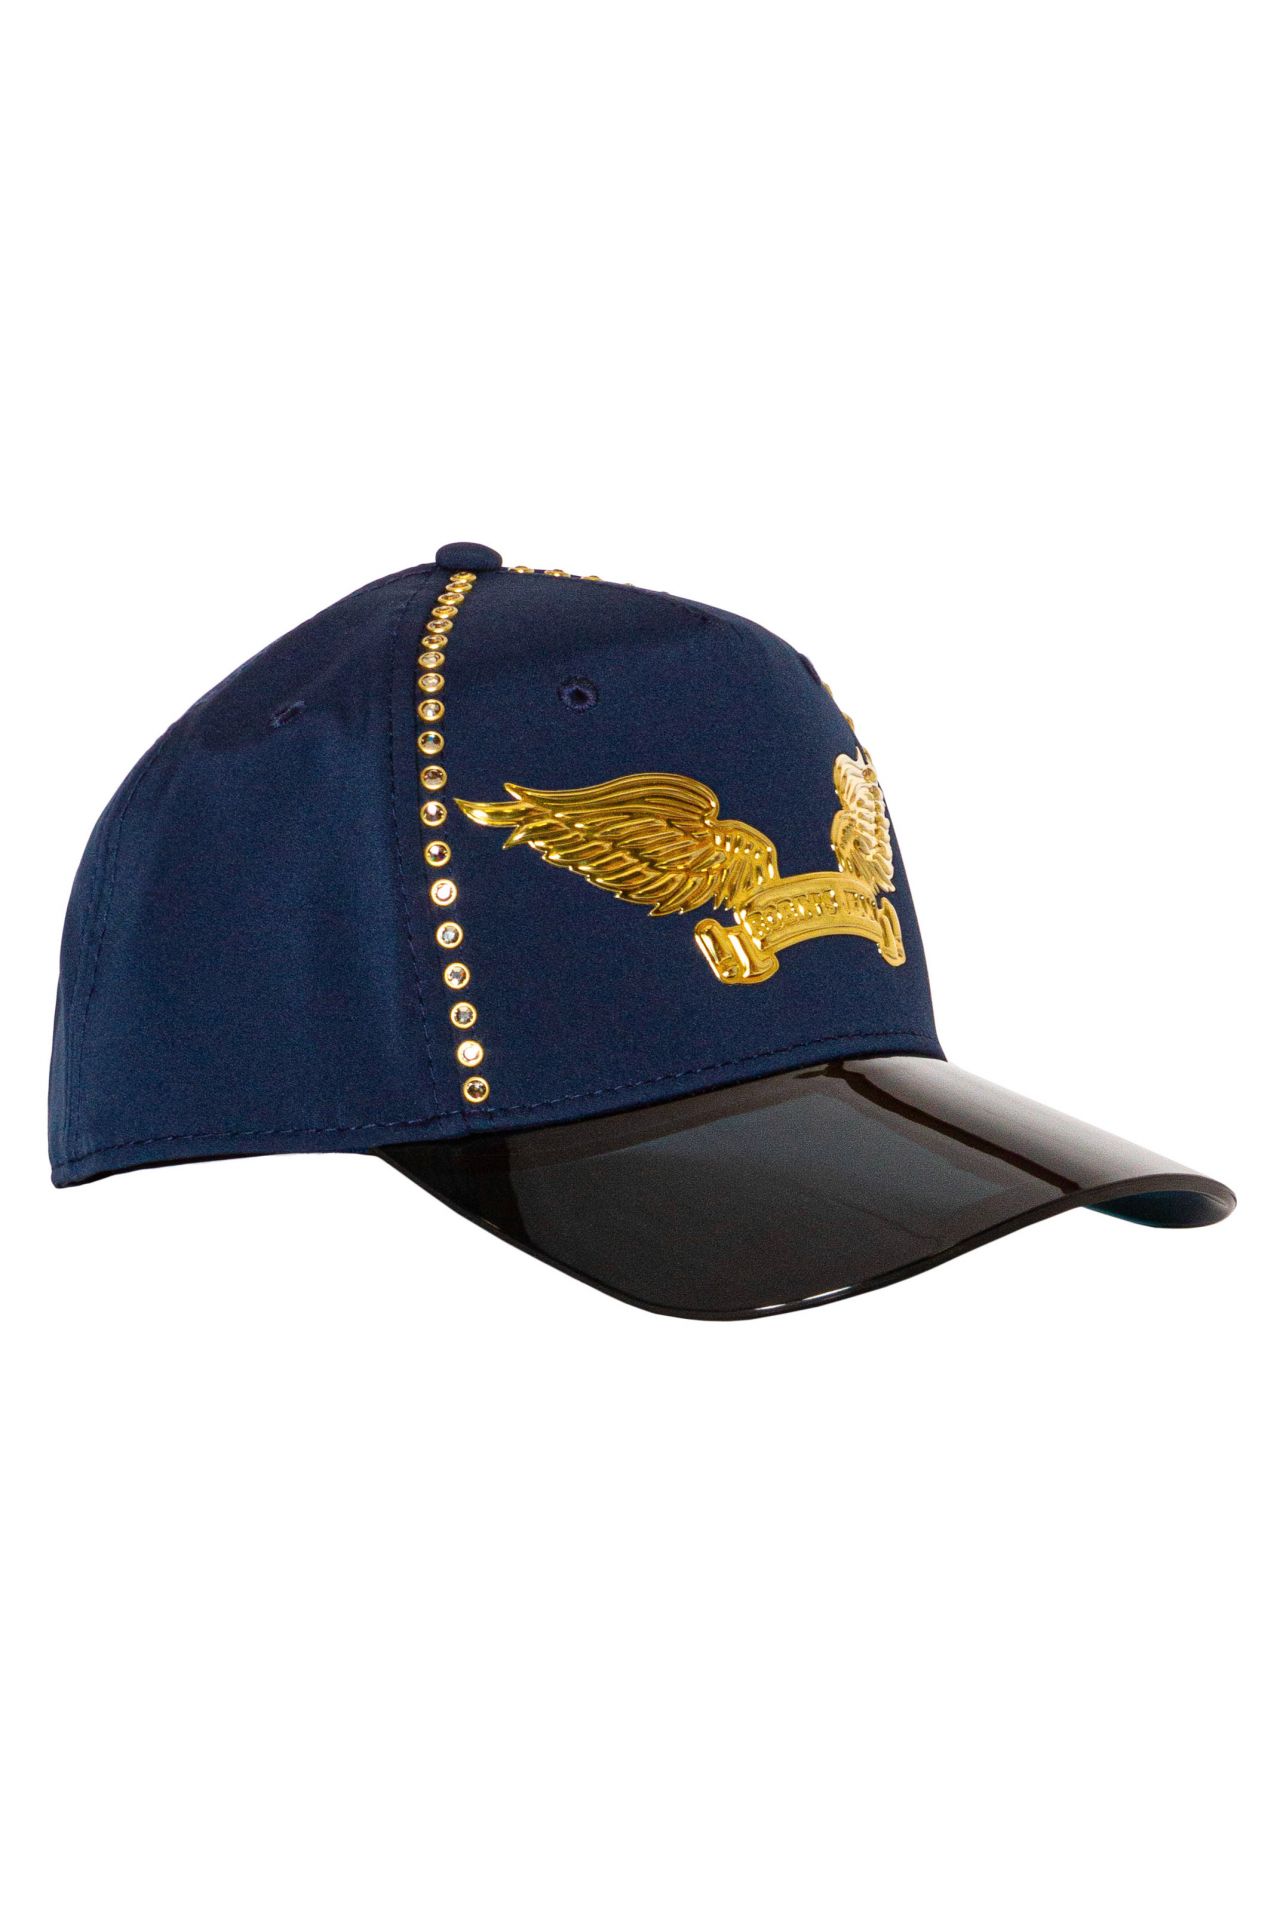 VISOR CAP IN NAVY WITH OUTLINED CRYSTALS